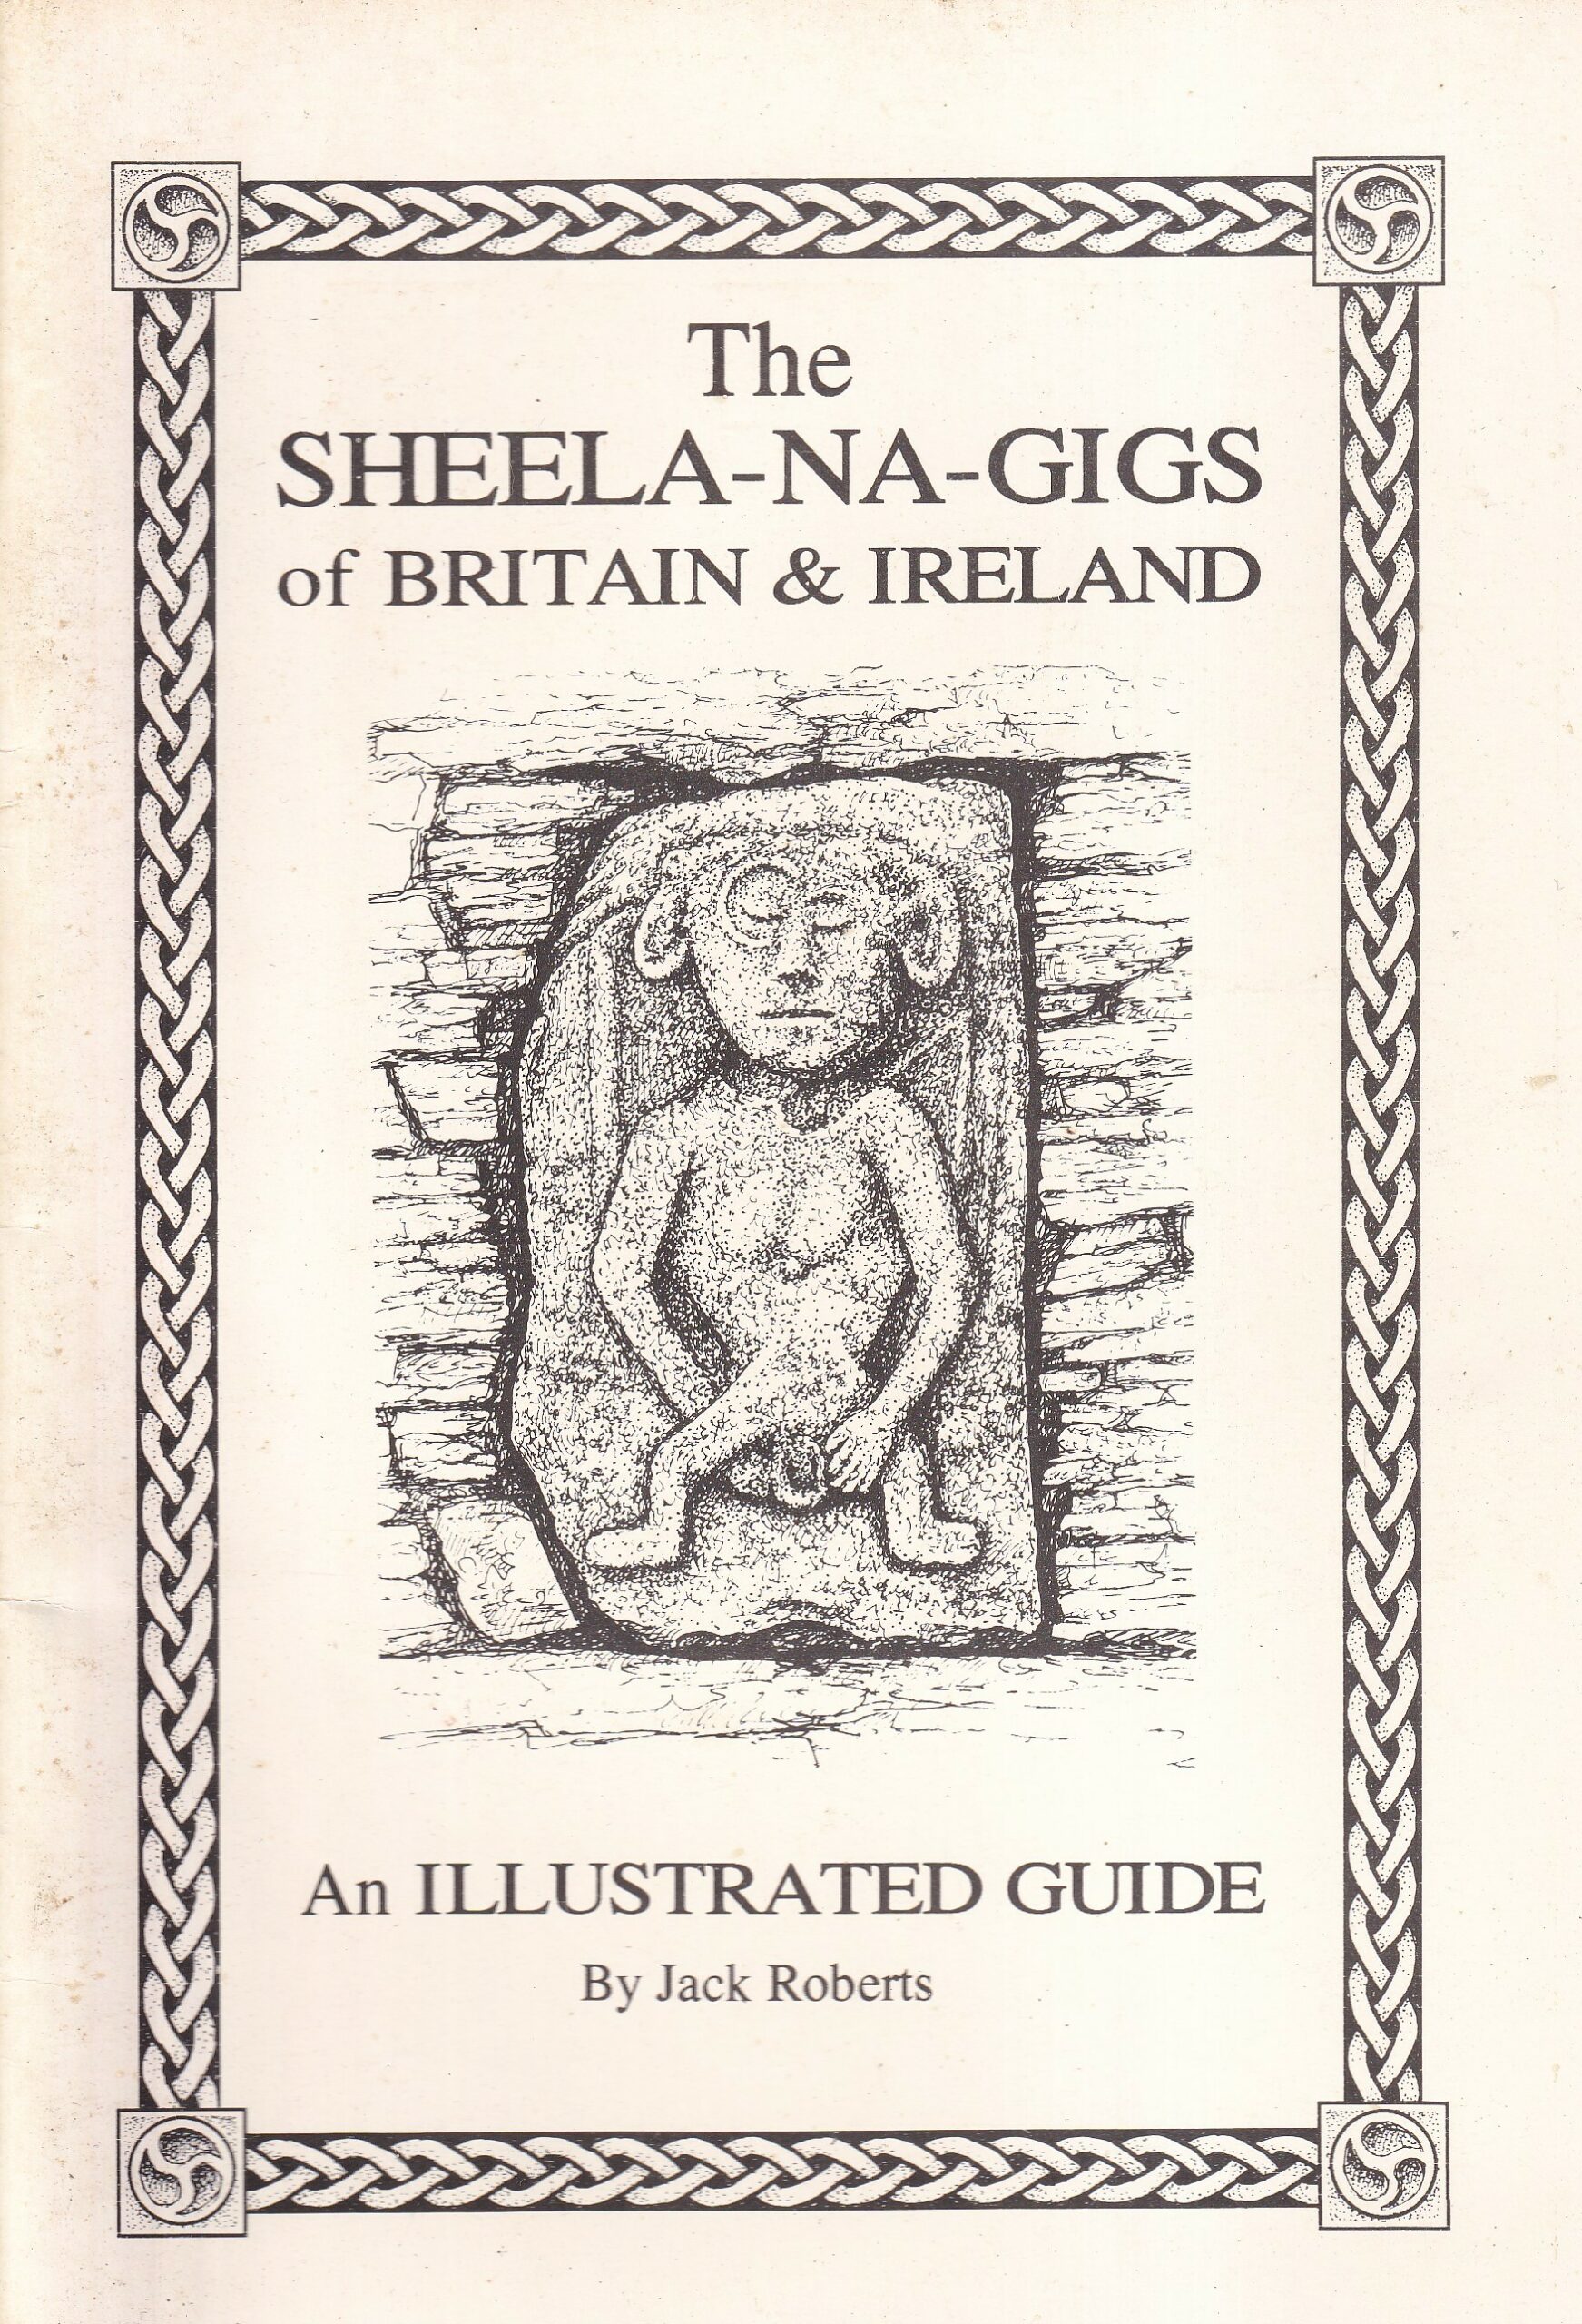 The Sheela-Na-Gigs of Britain and Ireland: An Illustrated Guide by Jack Roberts